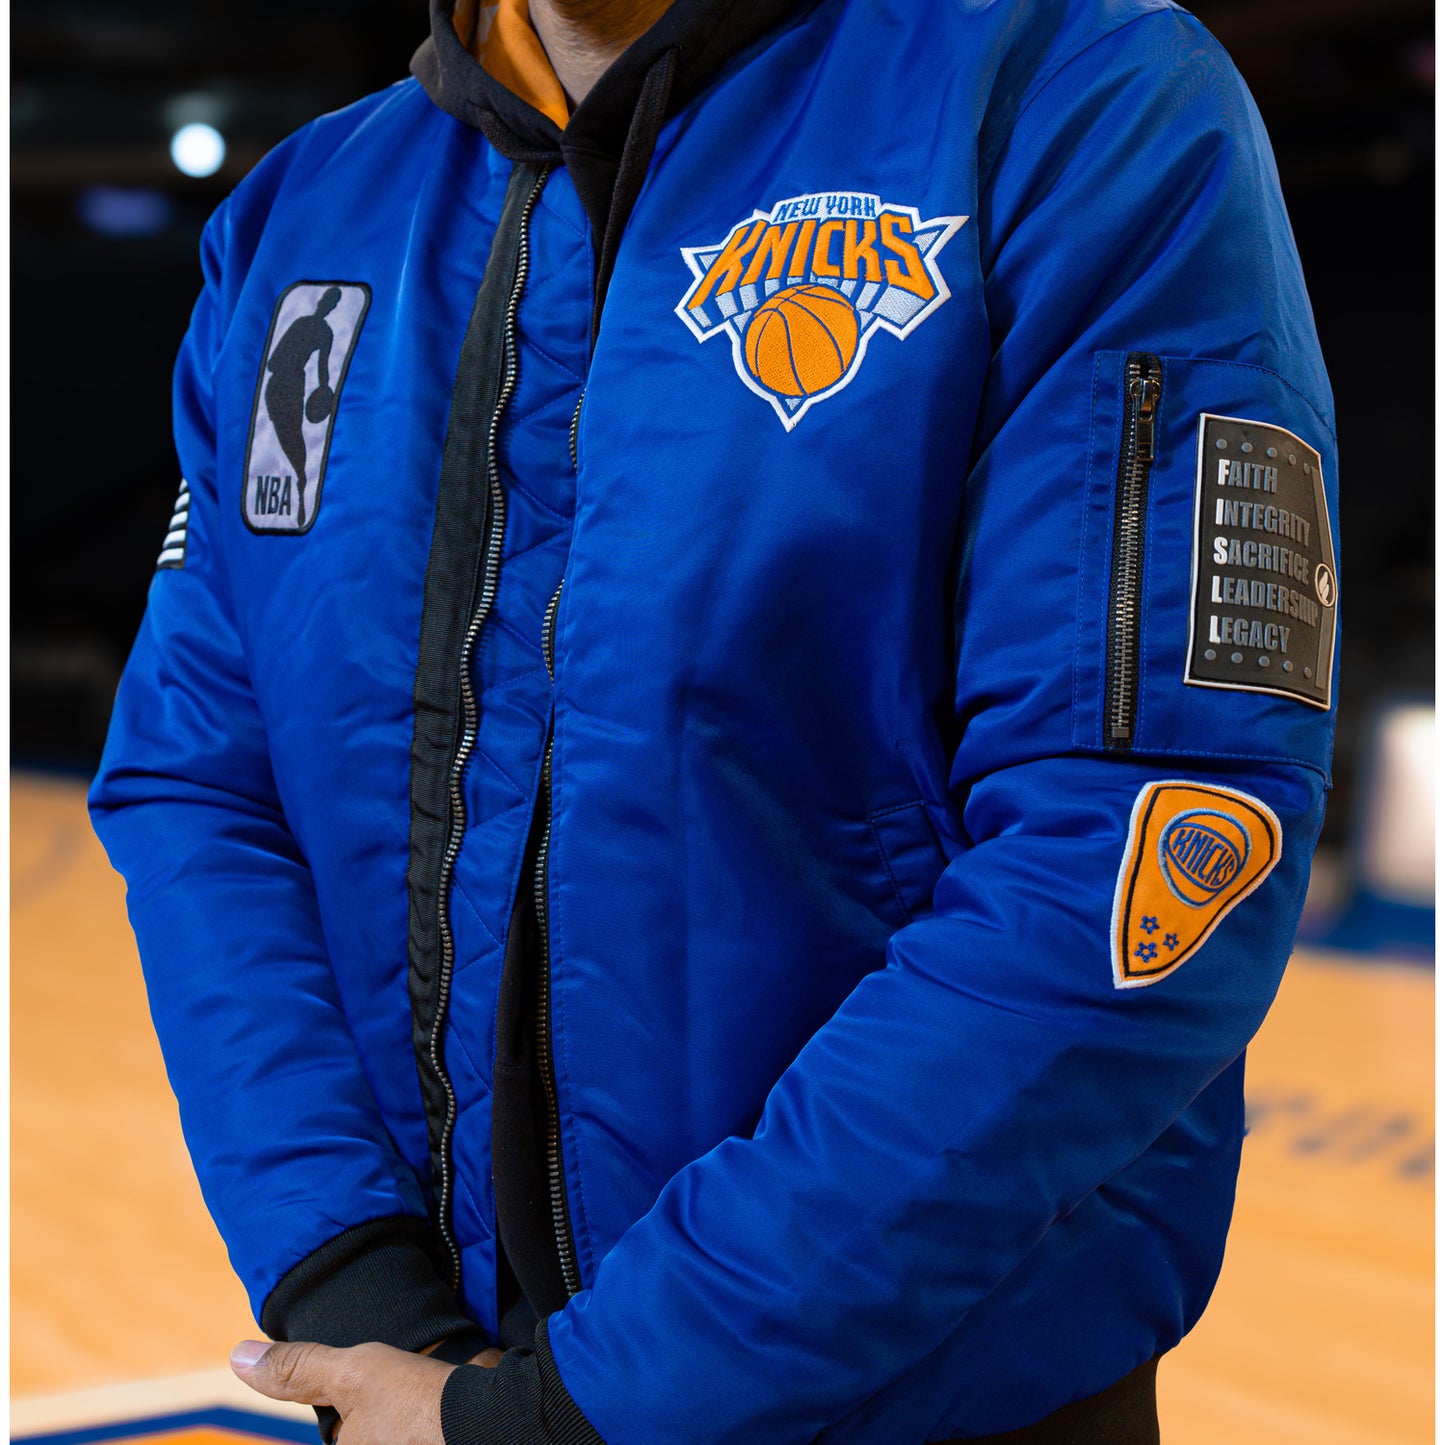 FISLL Knicks Black History Collection Flight Jacket - Modeled Up Close View